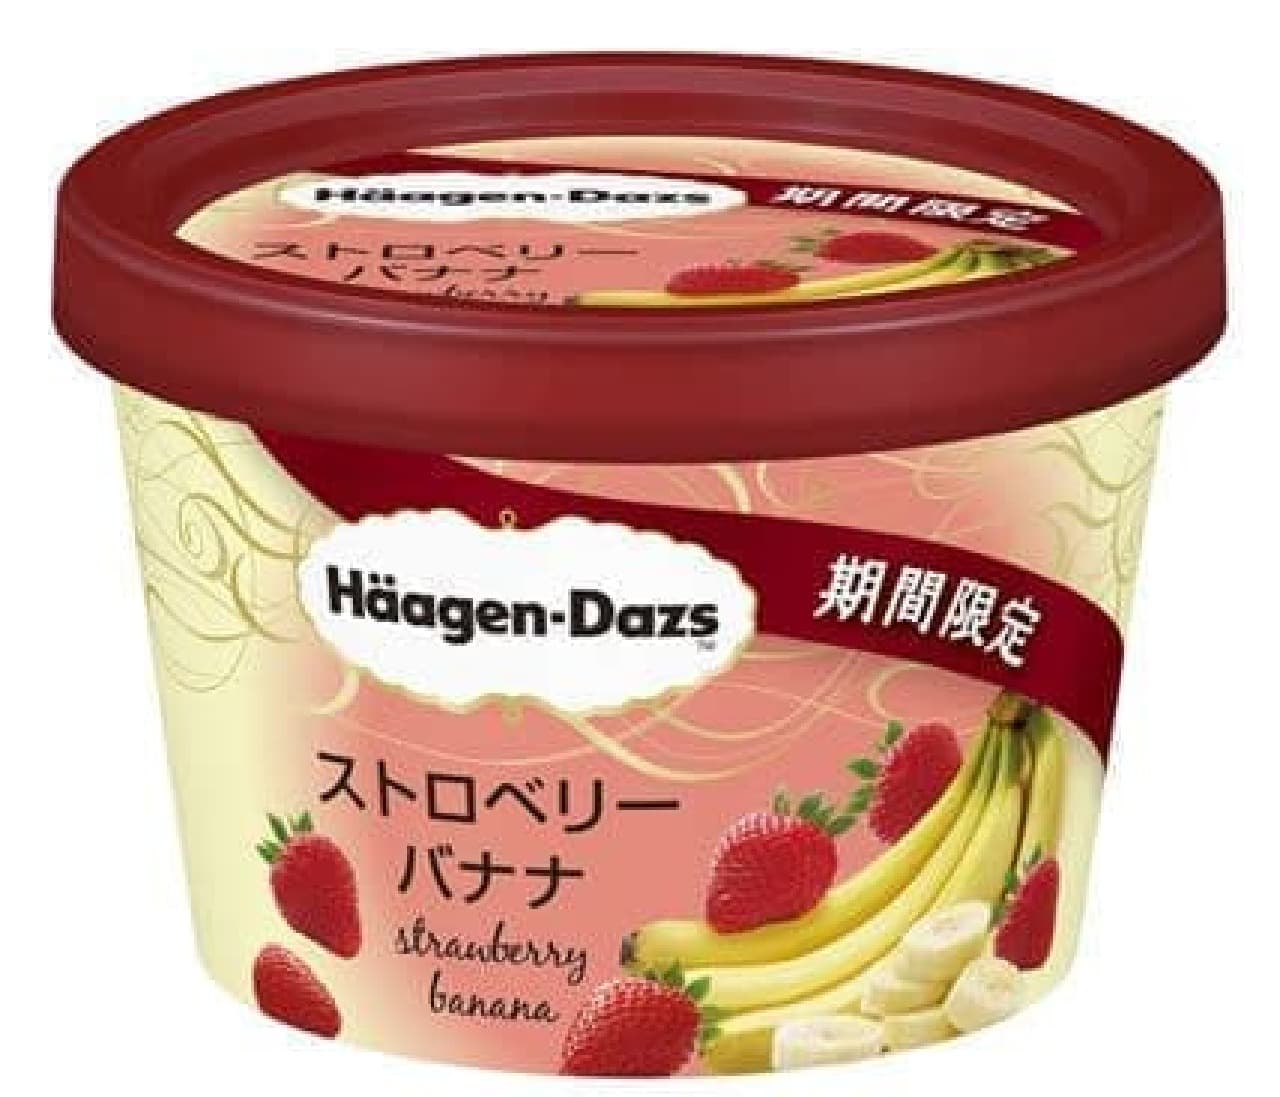 Convenience store limited "Strawberry Banana"